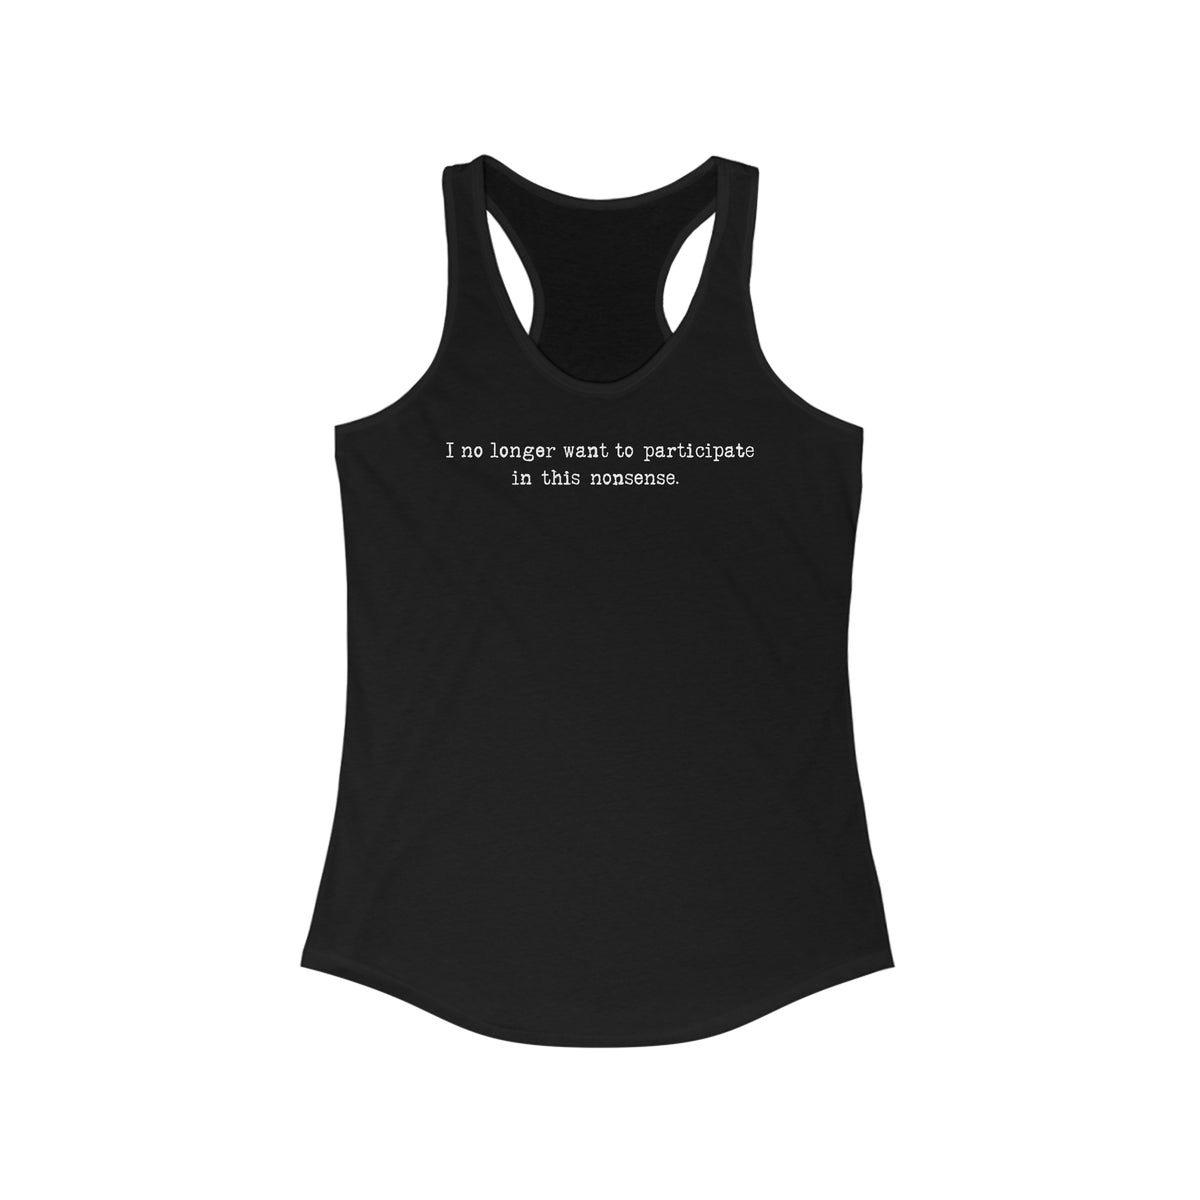 I No Longer Want To Participate In This Nonsense. - Women’s Racerback Tank